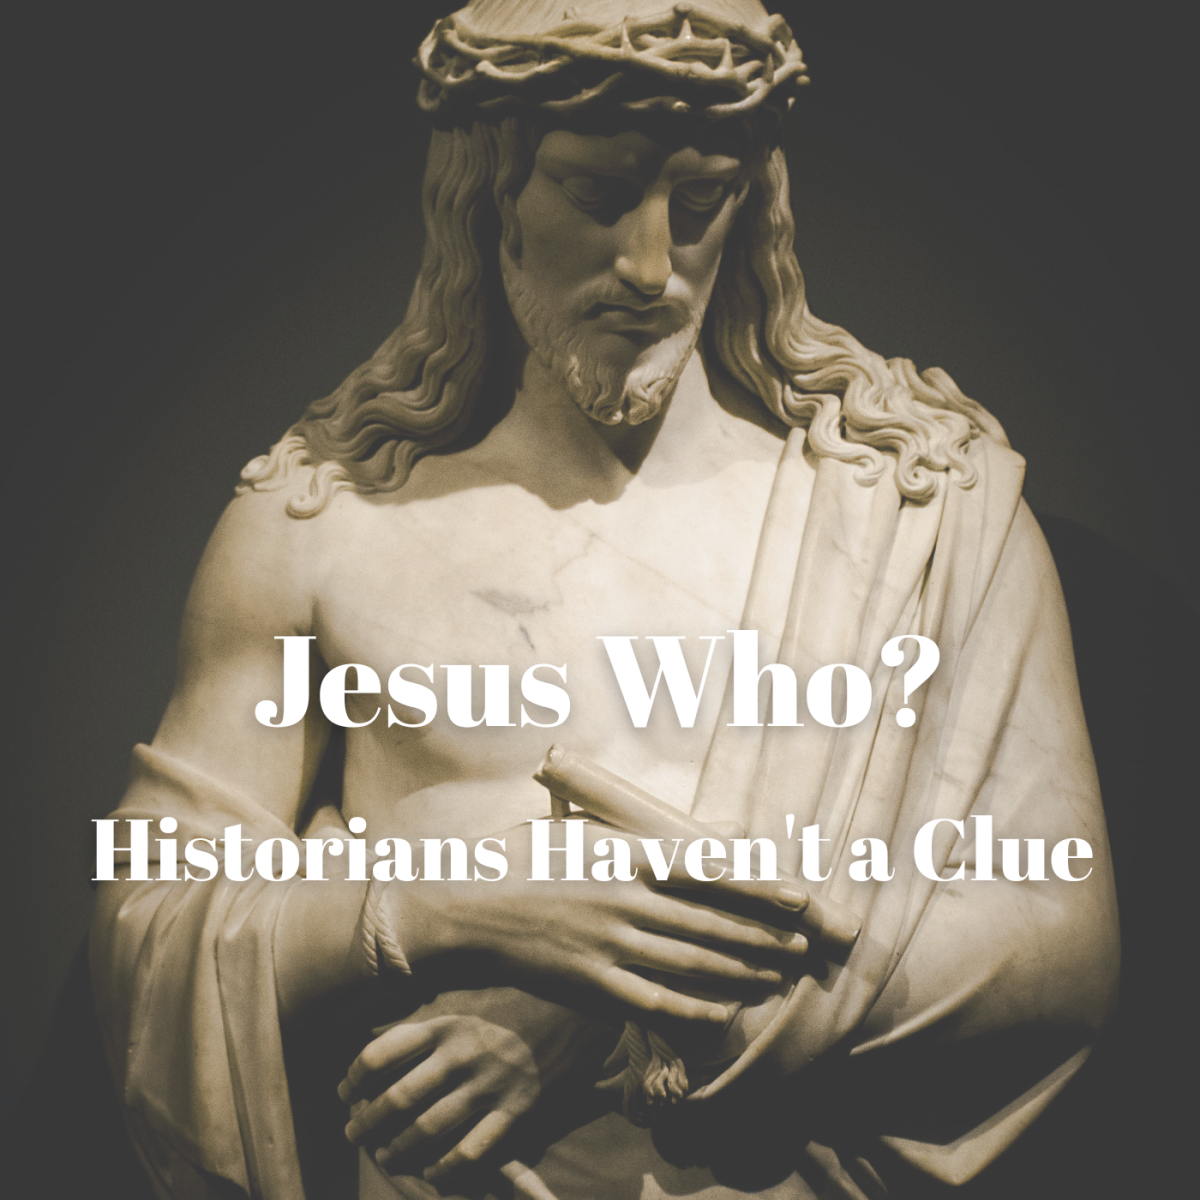 Is There Any Historical Proof for the Existence of Jesus? - Owlcation